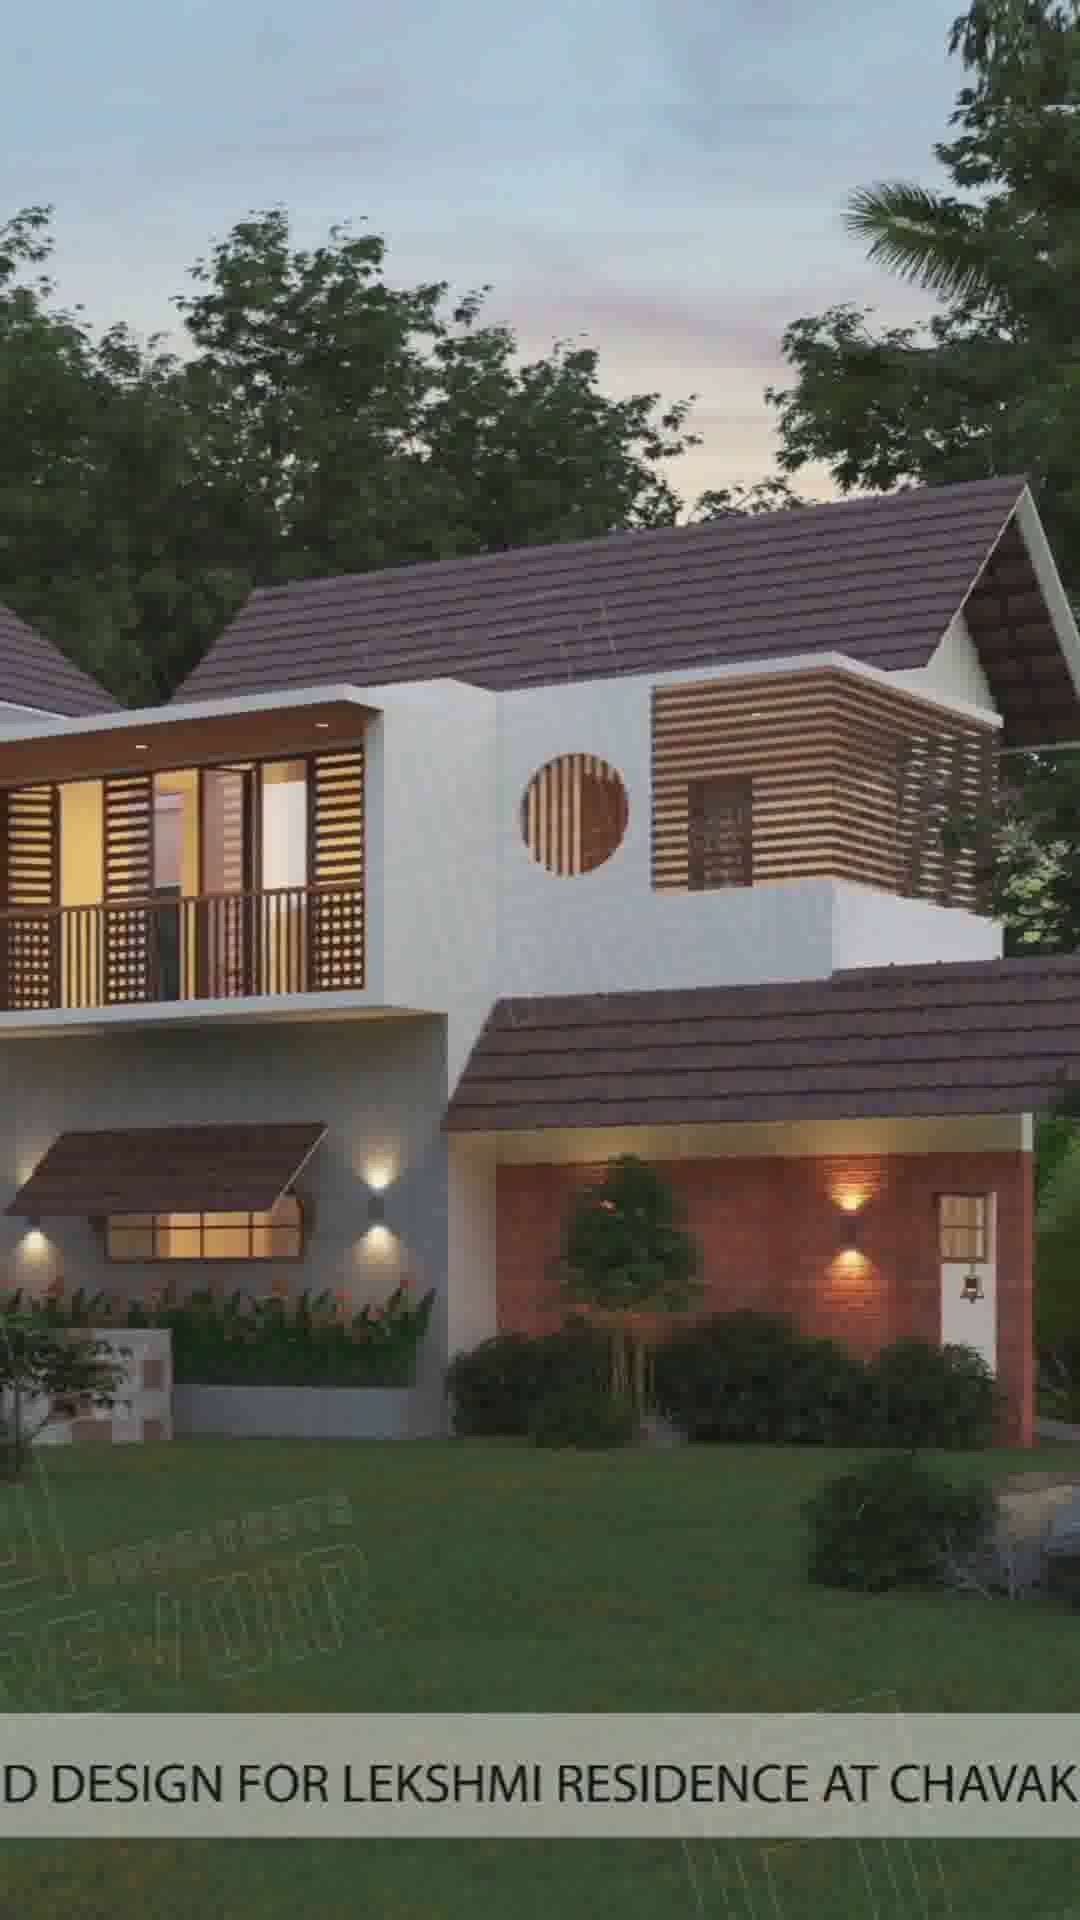 Proposed residential design at Chavakkad 
Clients Mr. Suresh Kumar and Mrs. Lekshmi Bai
.
.
.
.
.
.
.
#architectures  #architects #archdaily #archdaily #keralahomes  #Architect  #prevoirarchitects #homeexterior